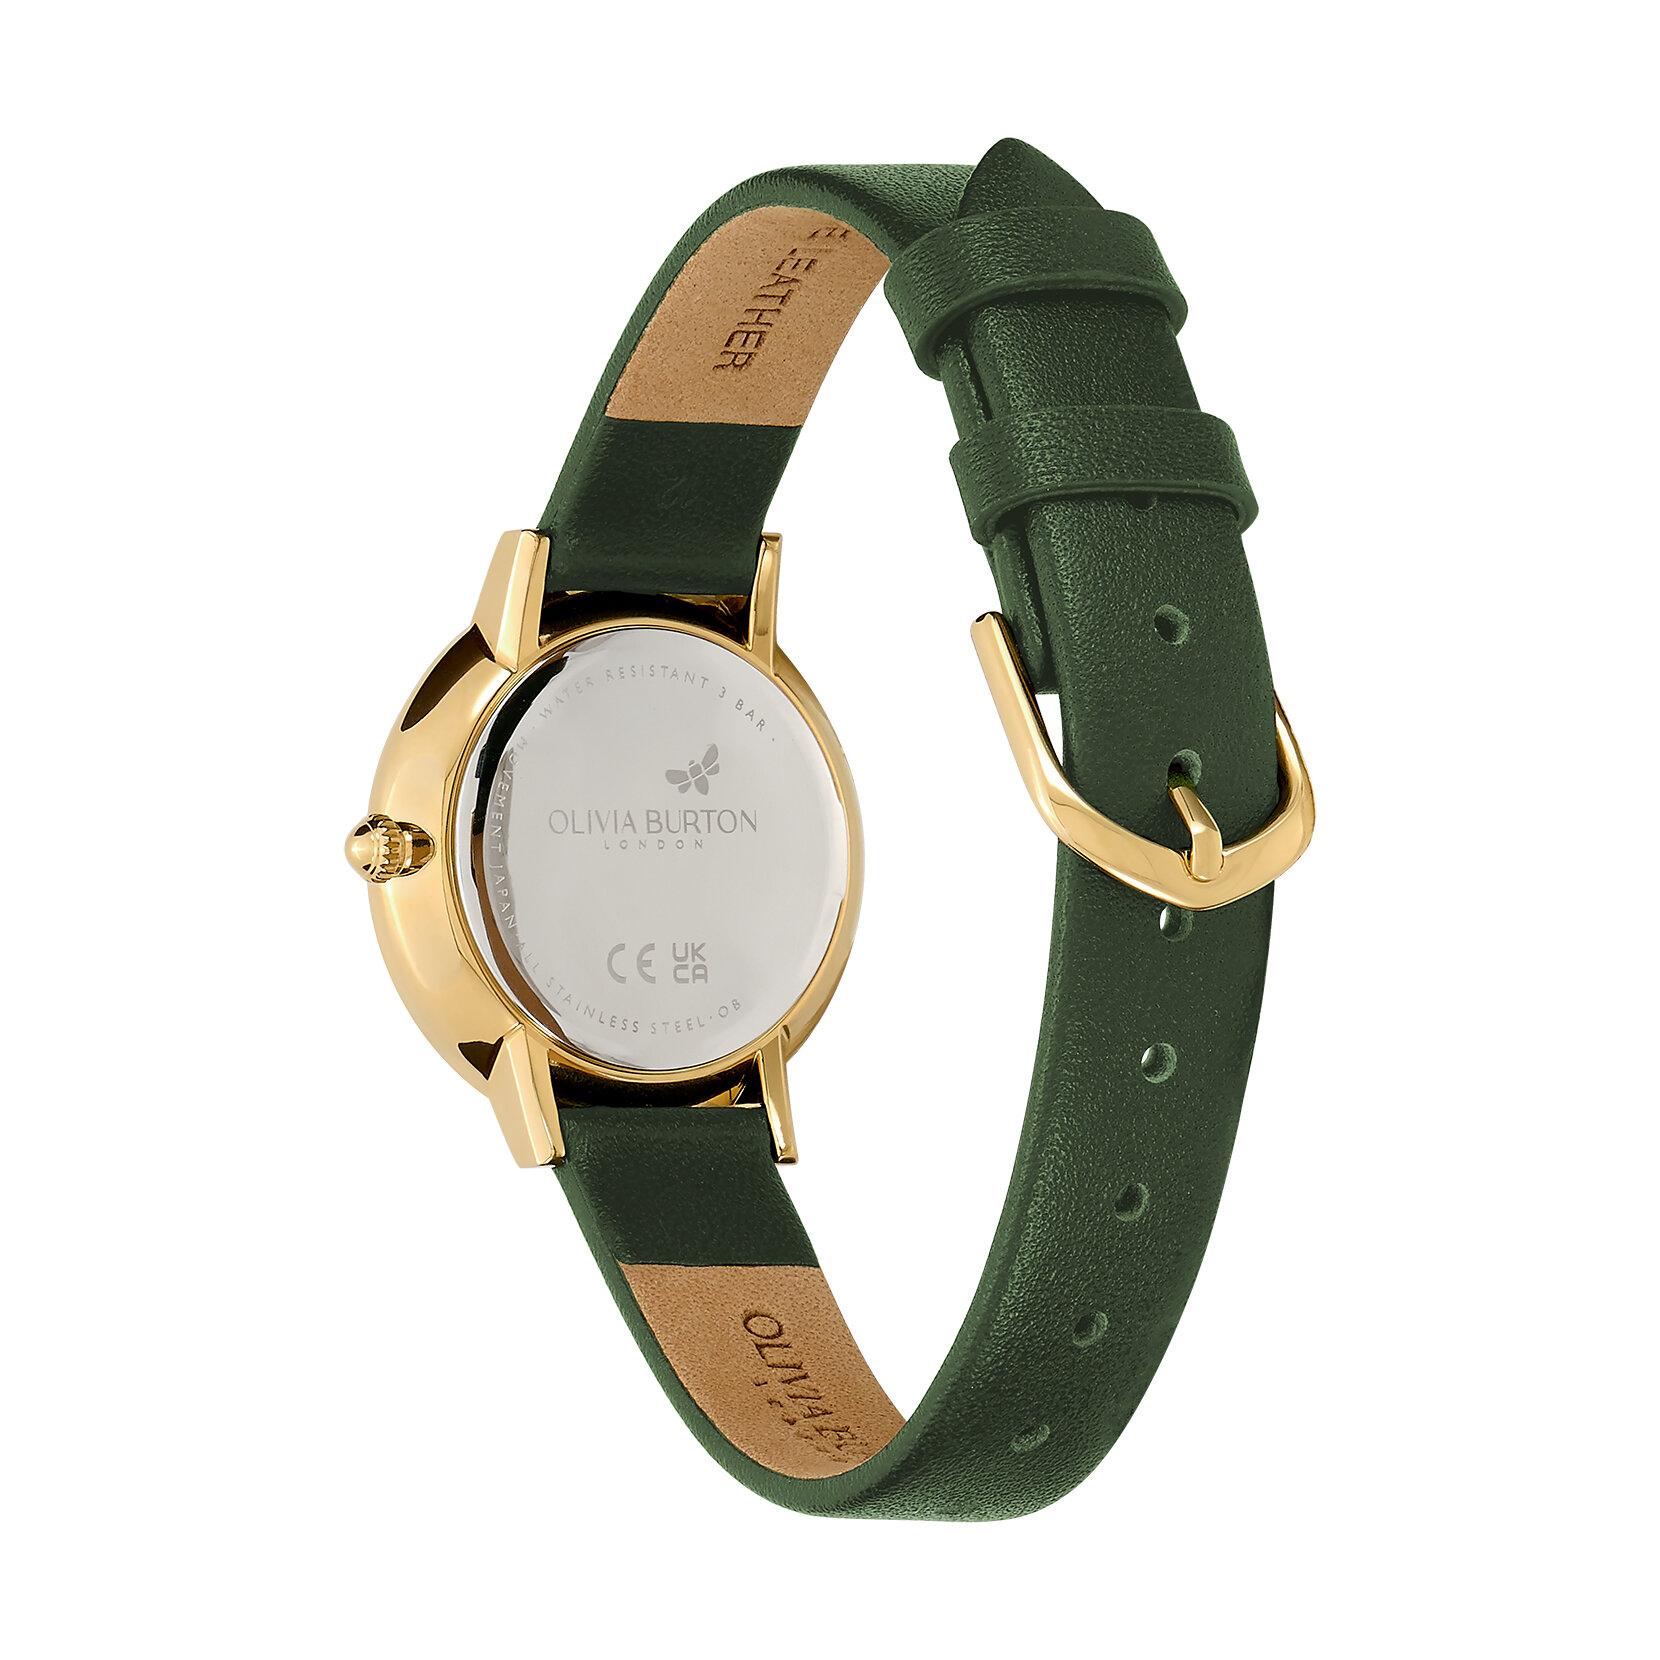 28mm Bee Ultra Slim Gold & Green Leather Strap Watch